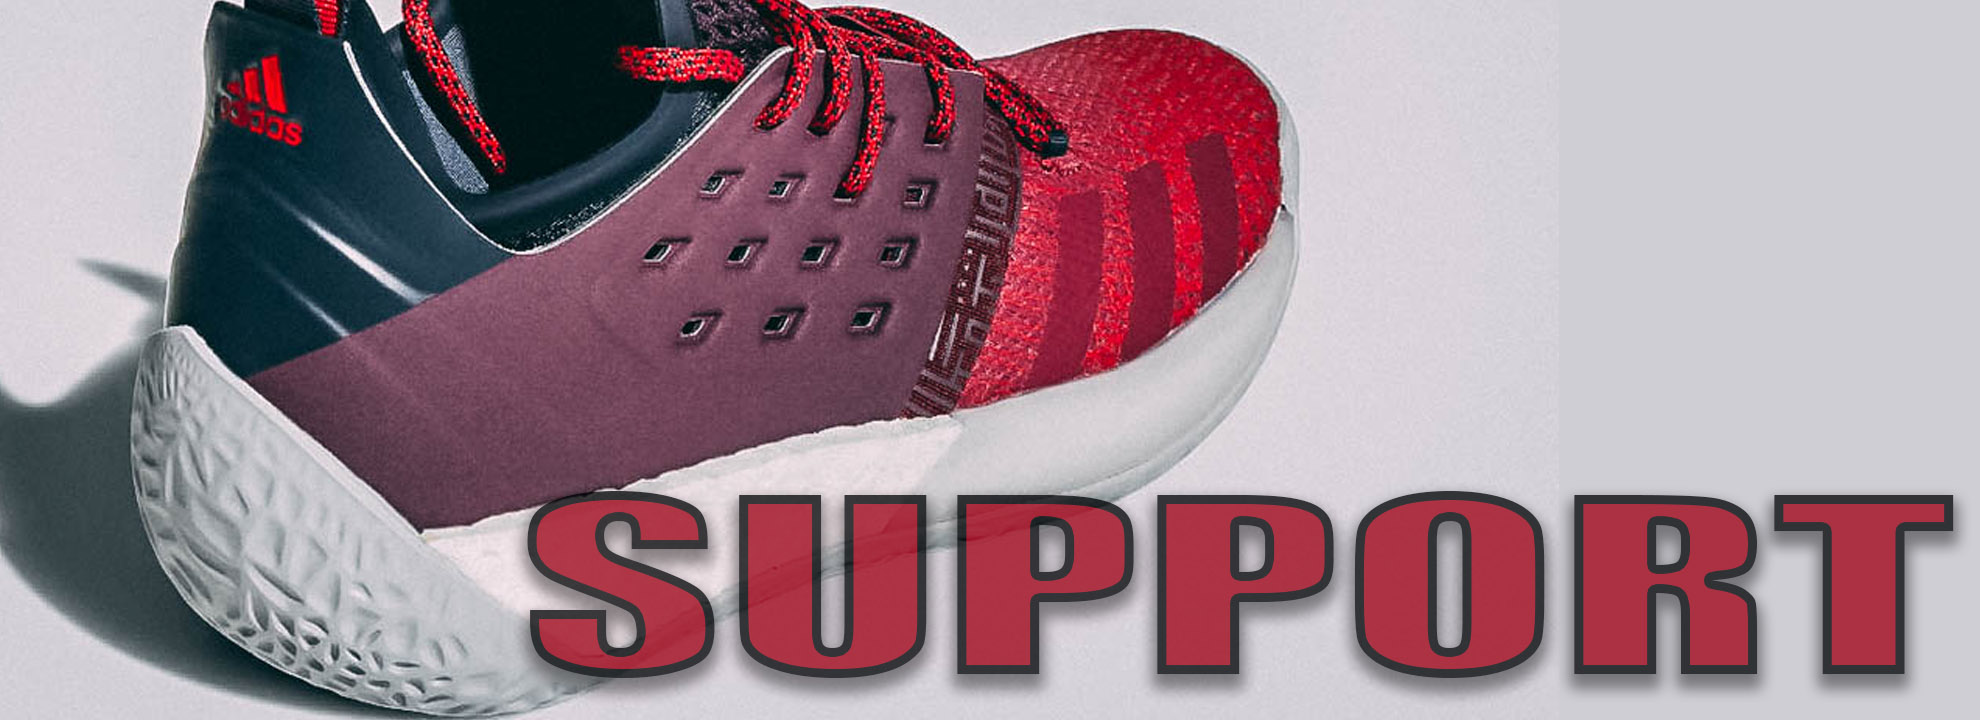 adidas harden vol 2 performance review anotherpair support